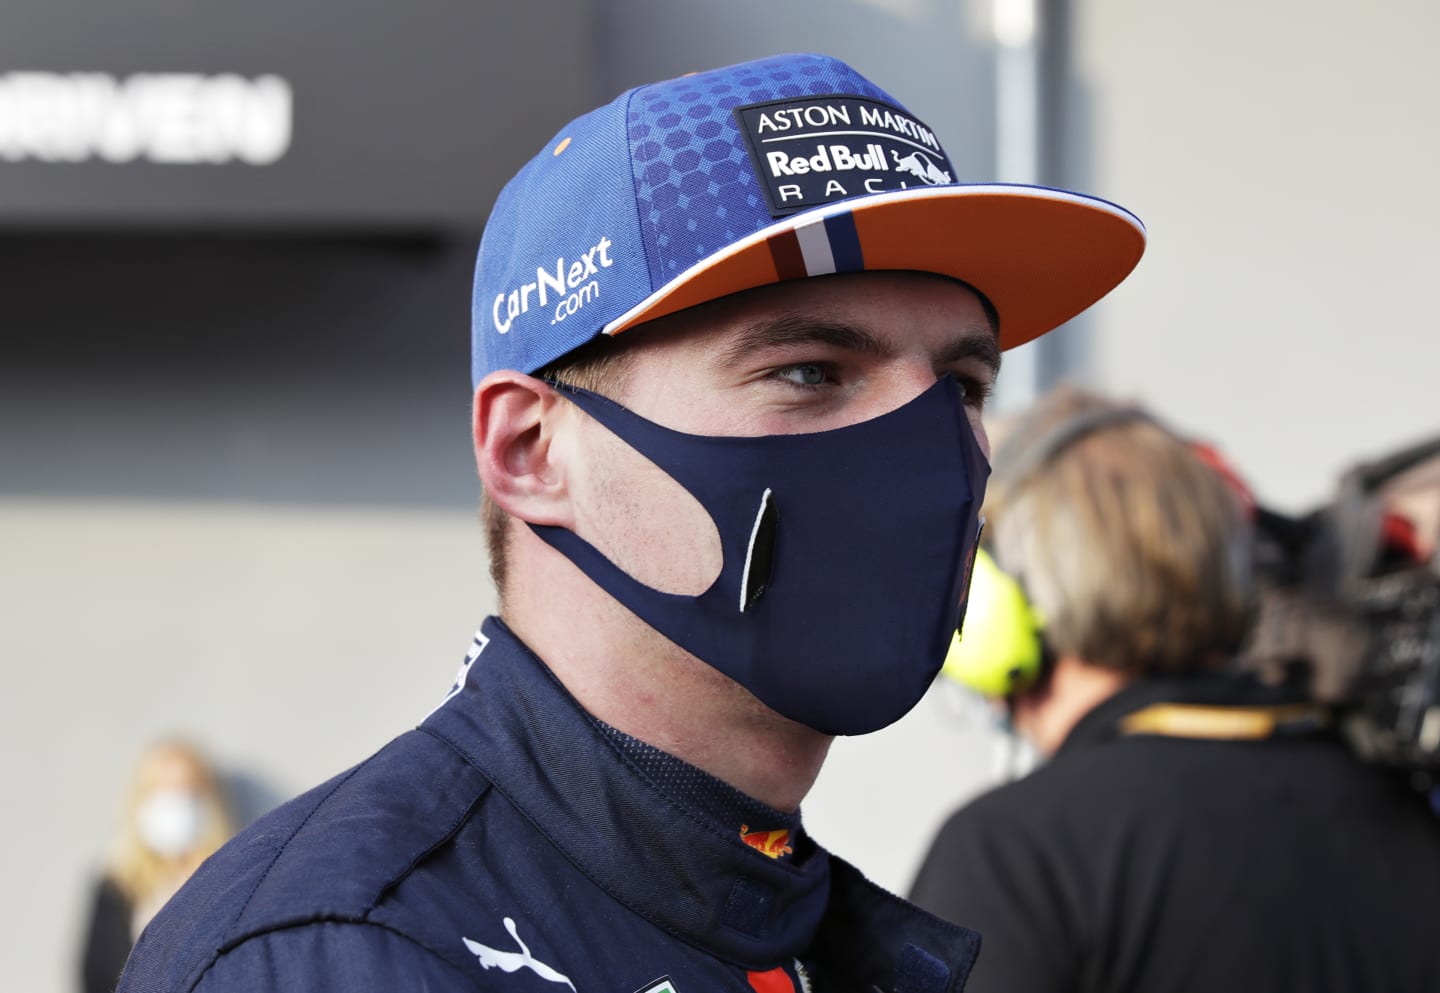 IMOLA, ITALY - OCTOBER 31: Third place qualifier Max Verstappen of Netherlands and Red Bull Racing talks to the media in the Paddock after qualifying ahead of the F1 Grand Prix of Emilia Romagna at Autodromo Enzo e Dino Ferrari on October 31, 2020 in Imola, Italy. (Photo by Luca Bruno - Pool/Getty Images)